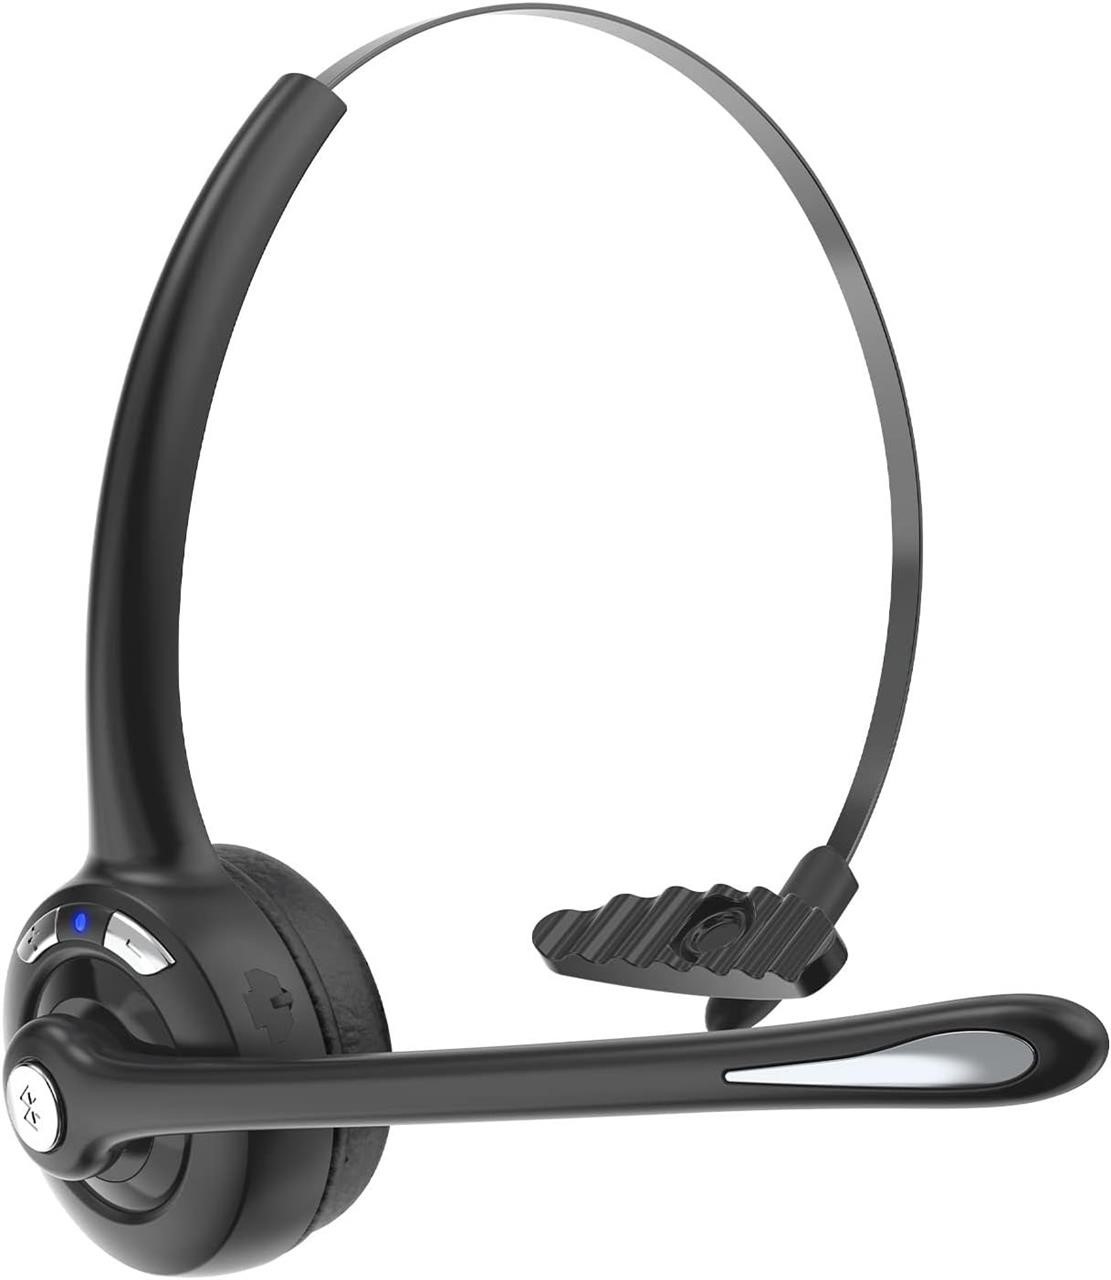 NEW Bluetooth Noise Canceling Headset w/Mic